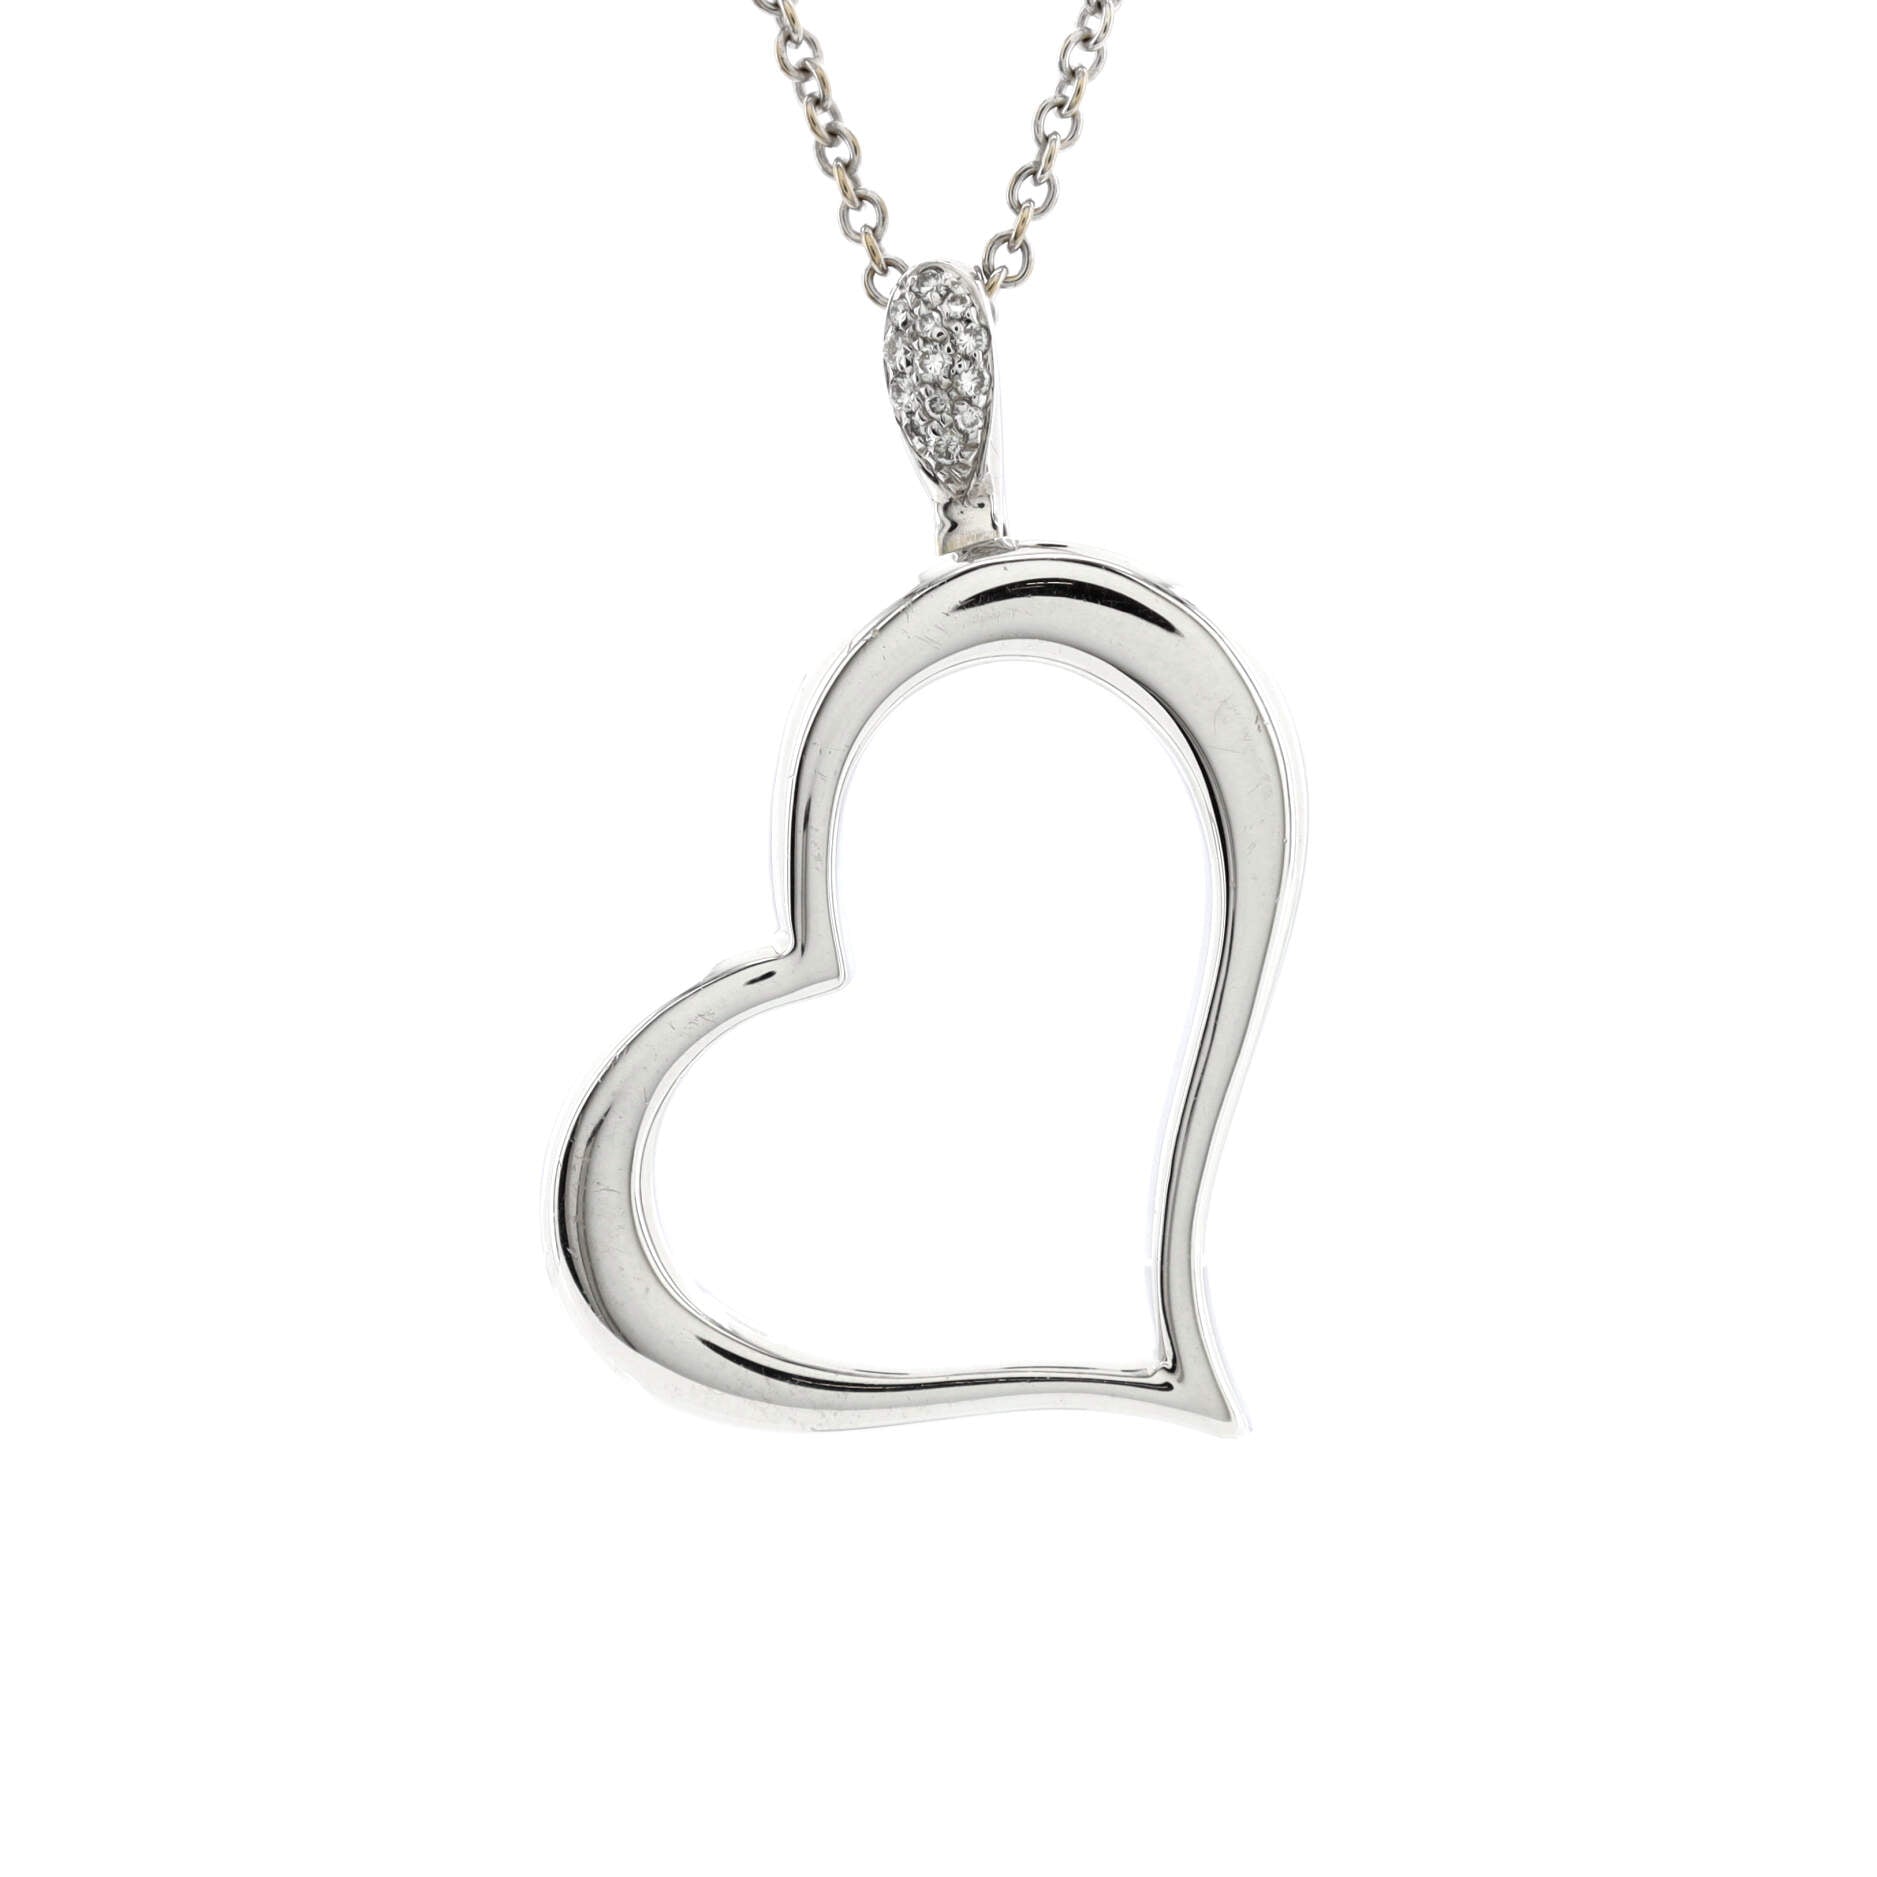 Limelight Hearts Pendant Necklace